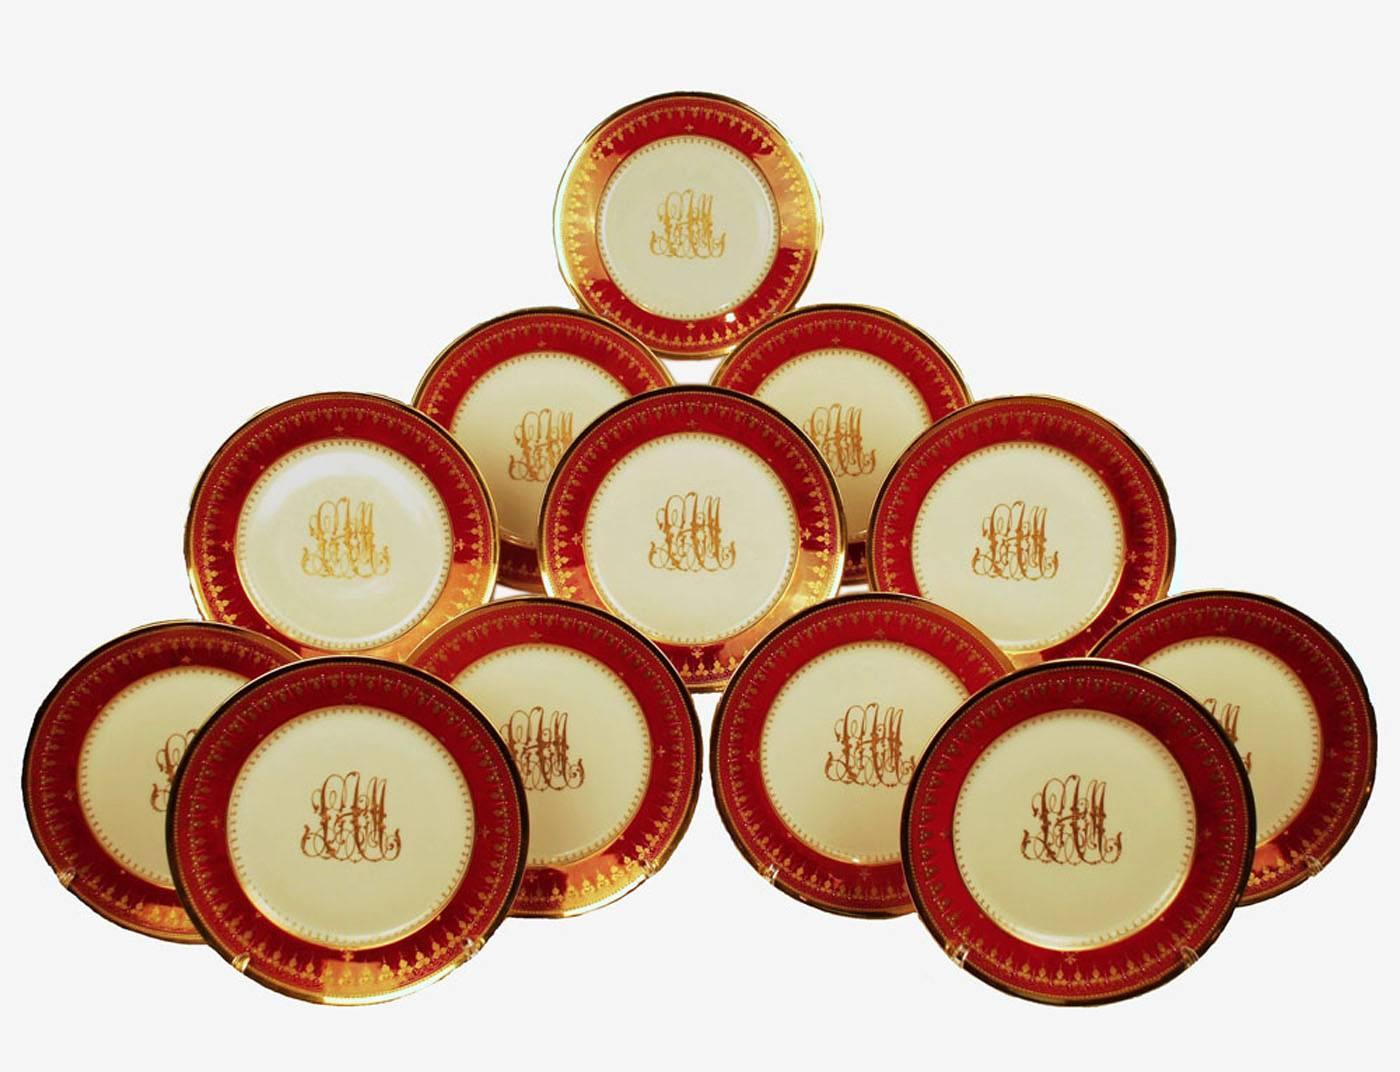 Raritet Antique Gallery presents our extensive collection of magnificent Dresden Ambrosius Lamm Studio porcelain. Please see additional offerings.

Wonderful set of 12 dessert or luncheon plates hand-painted in Ambrosius Lamm's Dresden studio. The